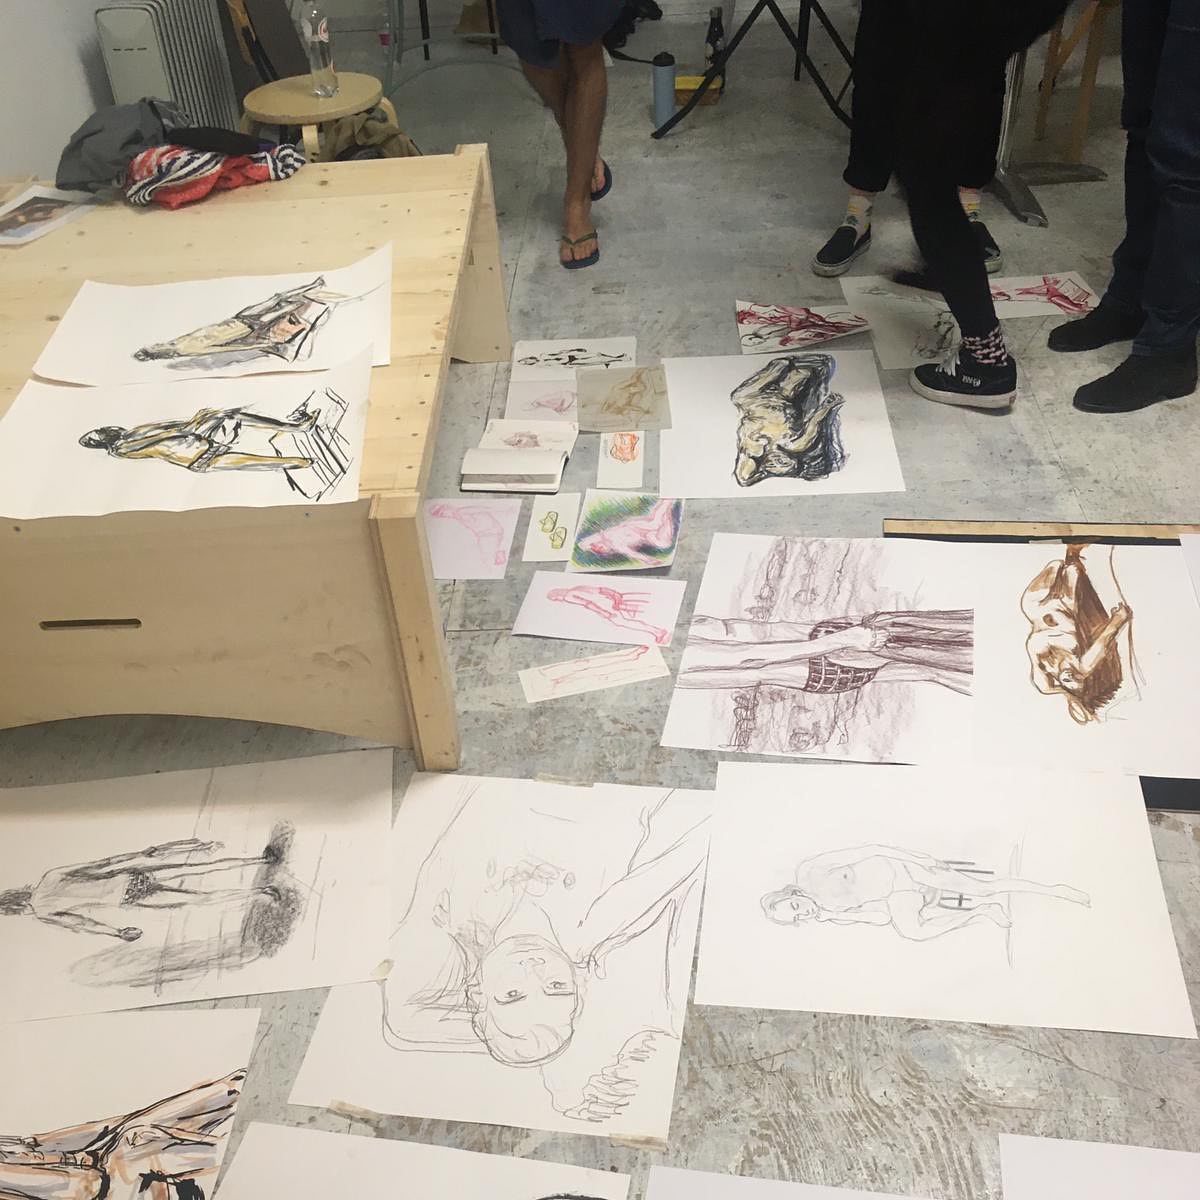 We had another Figure Drawing session yesterday, it was a great night! Lovely group, great model and me just messing arround with different materials, yay!.#figuredrawing #modeltekenen #artmodel #drawing